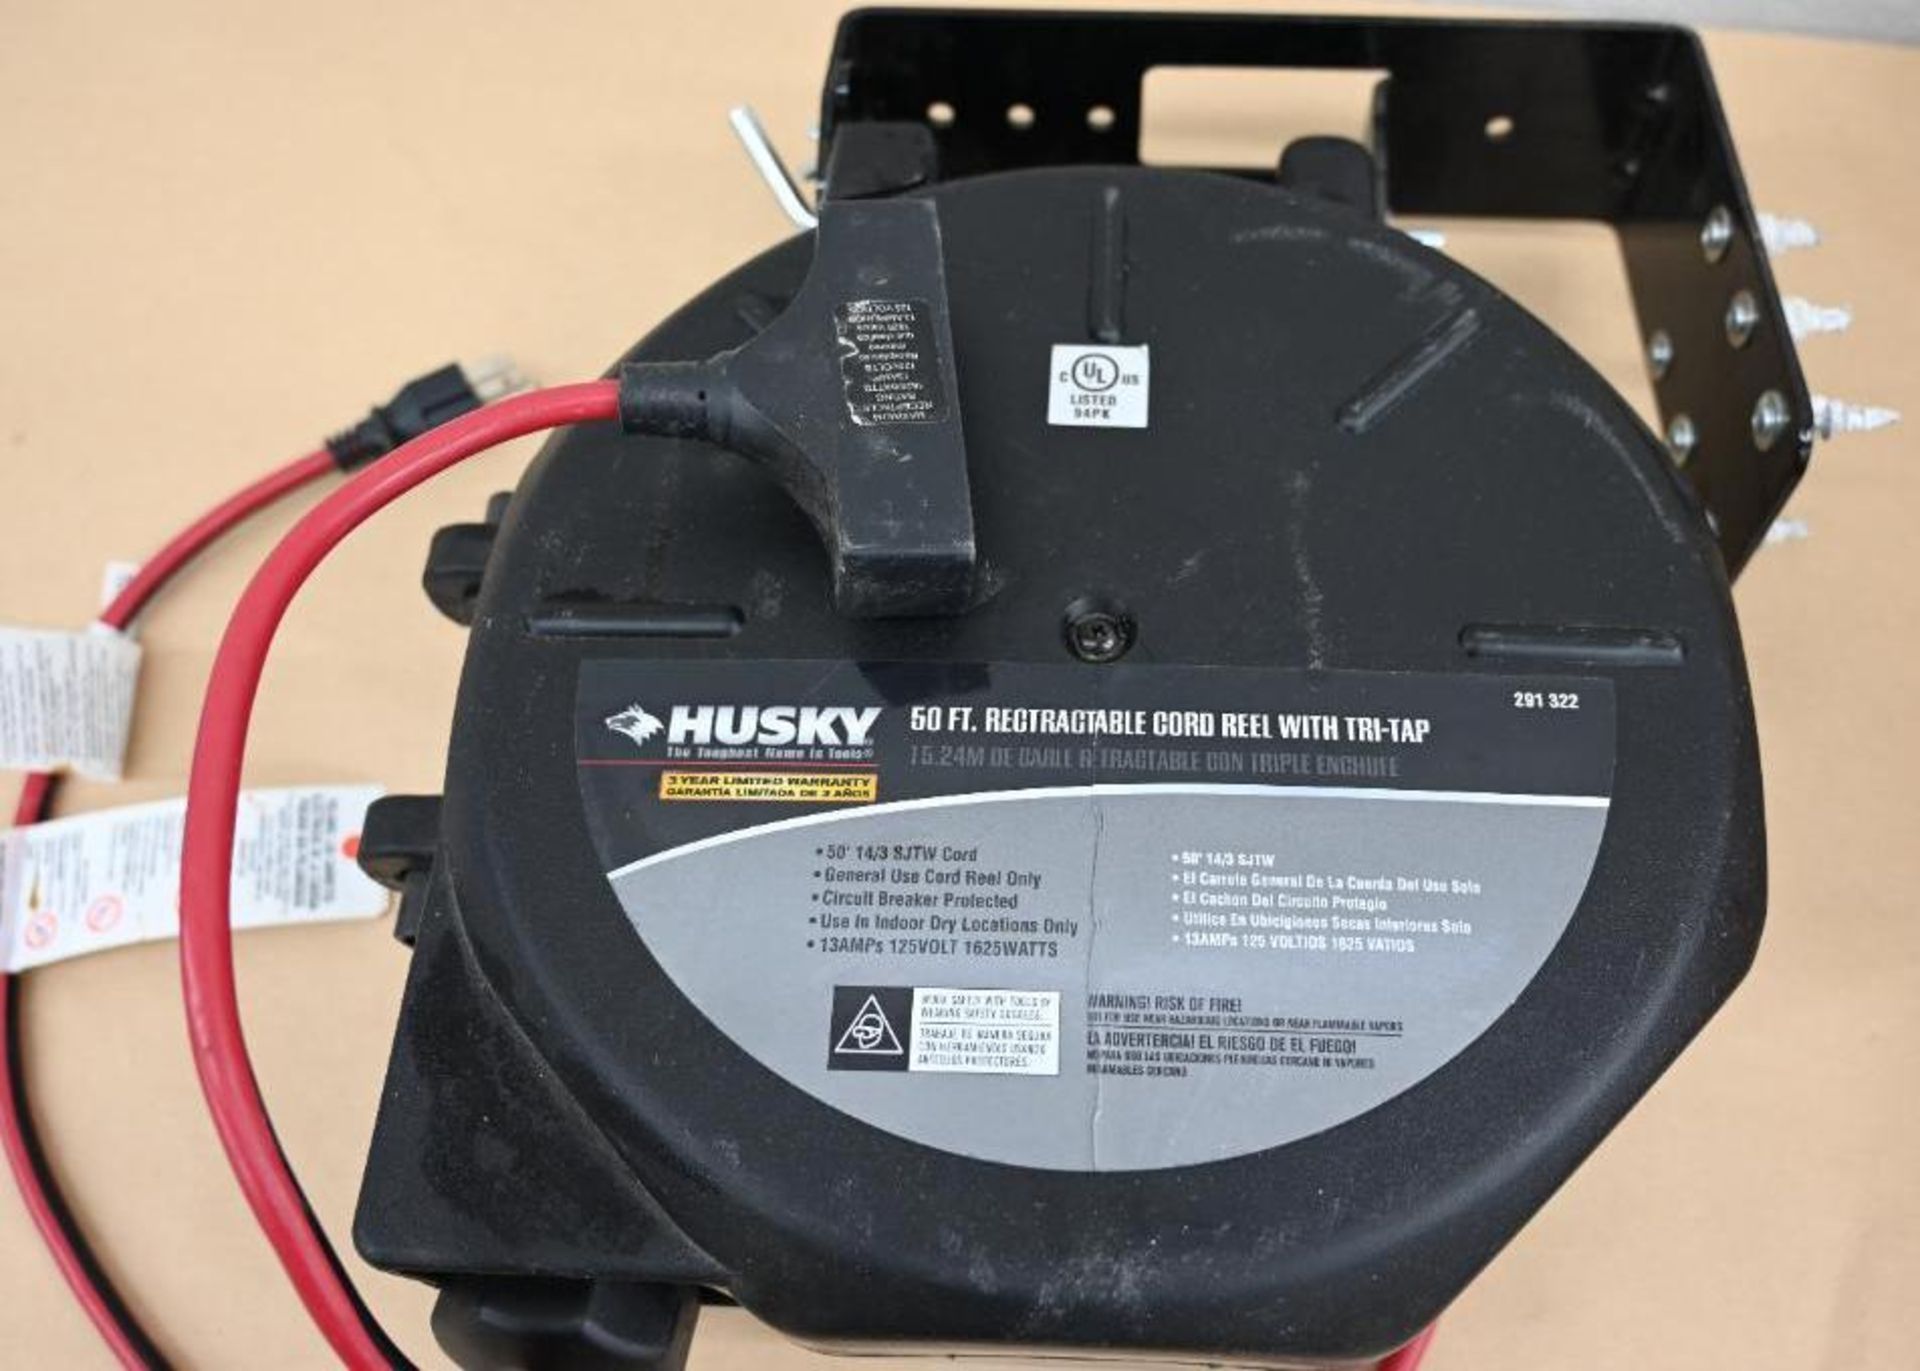 Husky 50' Retractable Cord Reel with Tri- Tap - Image 4 of 7